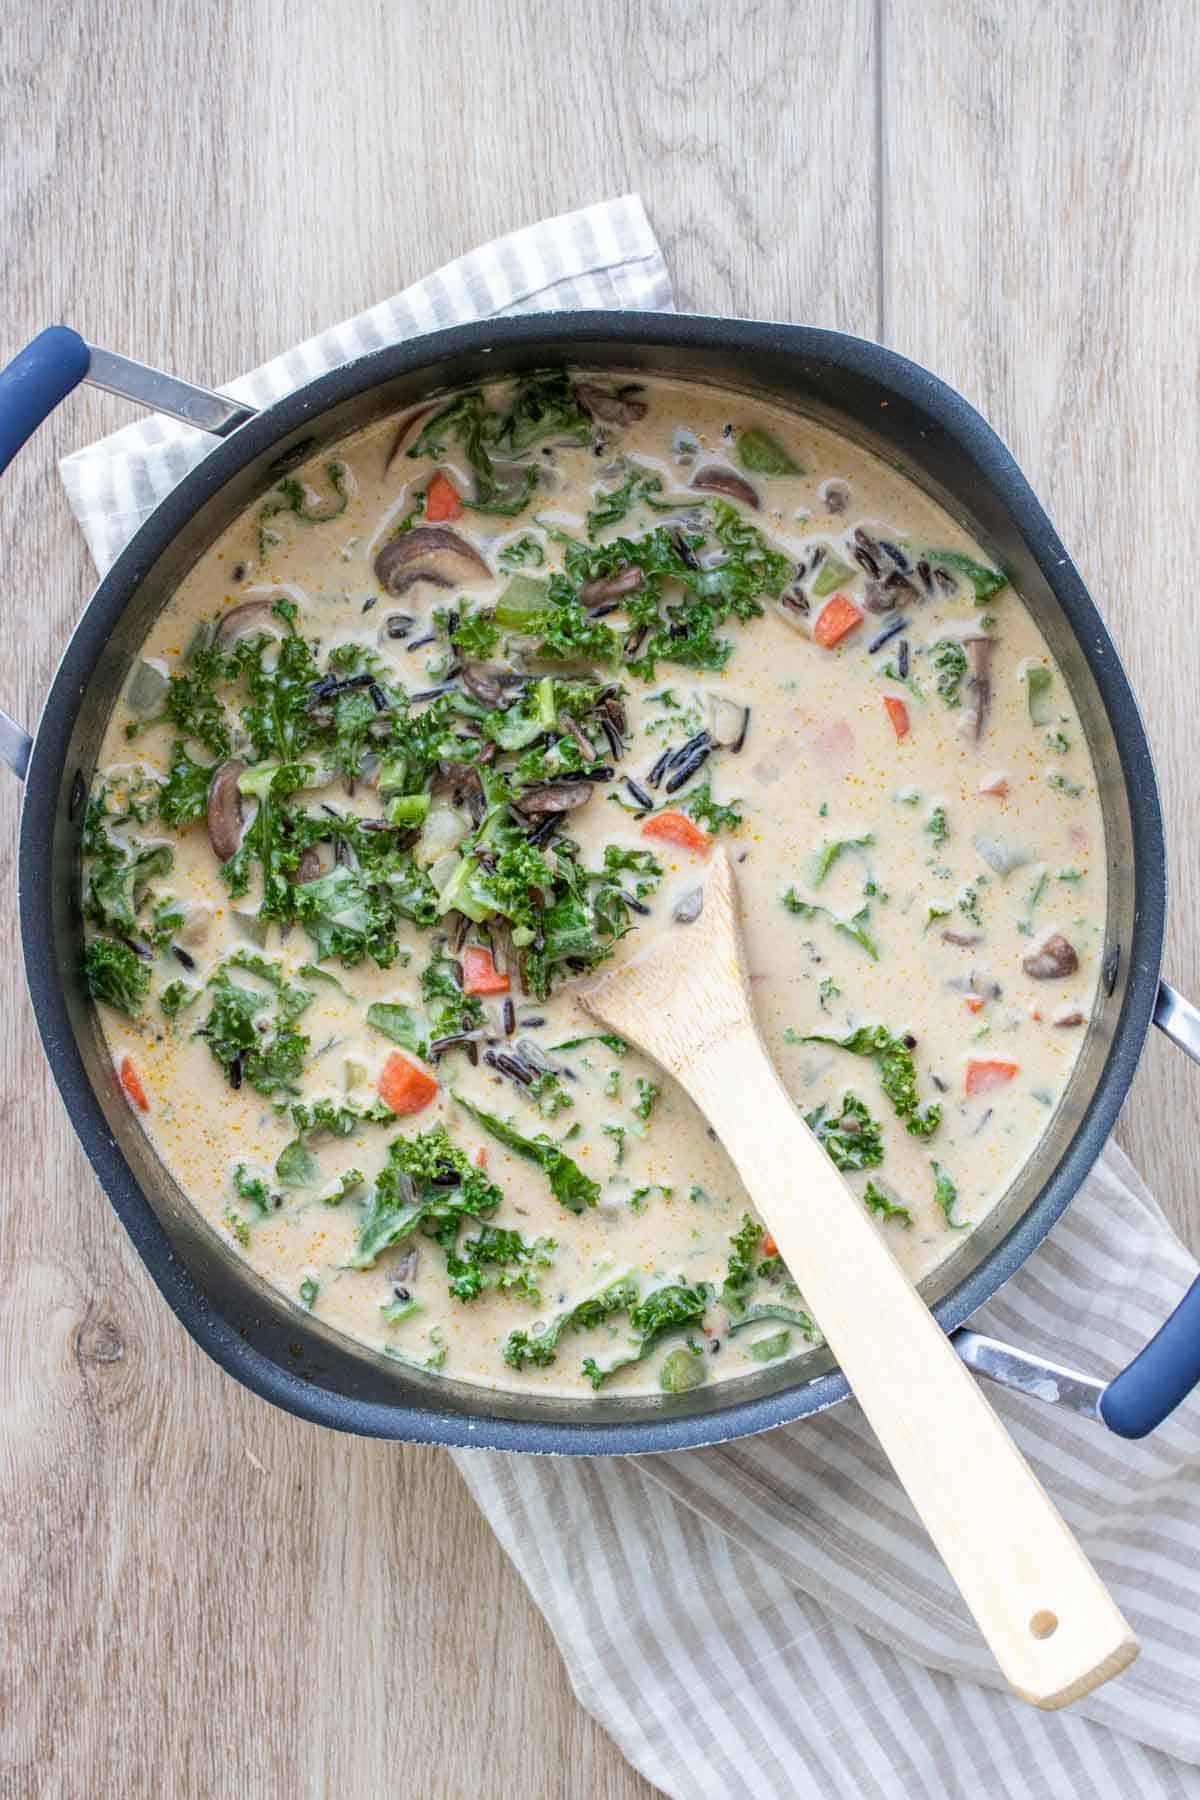 Top view of a black pot with a wooden spoon mixing a creamy soup with kale and veggies.